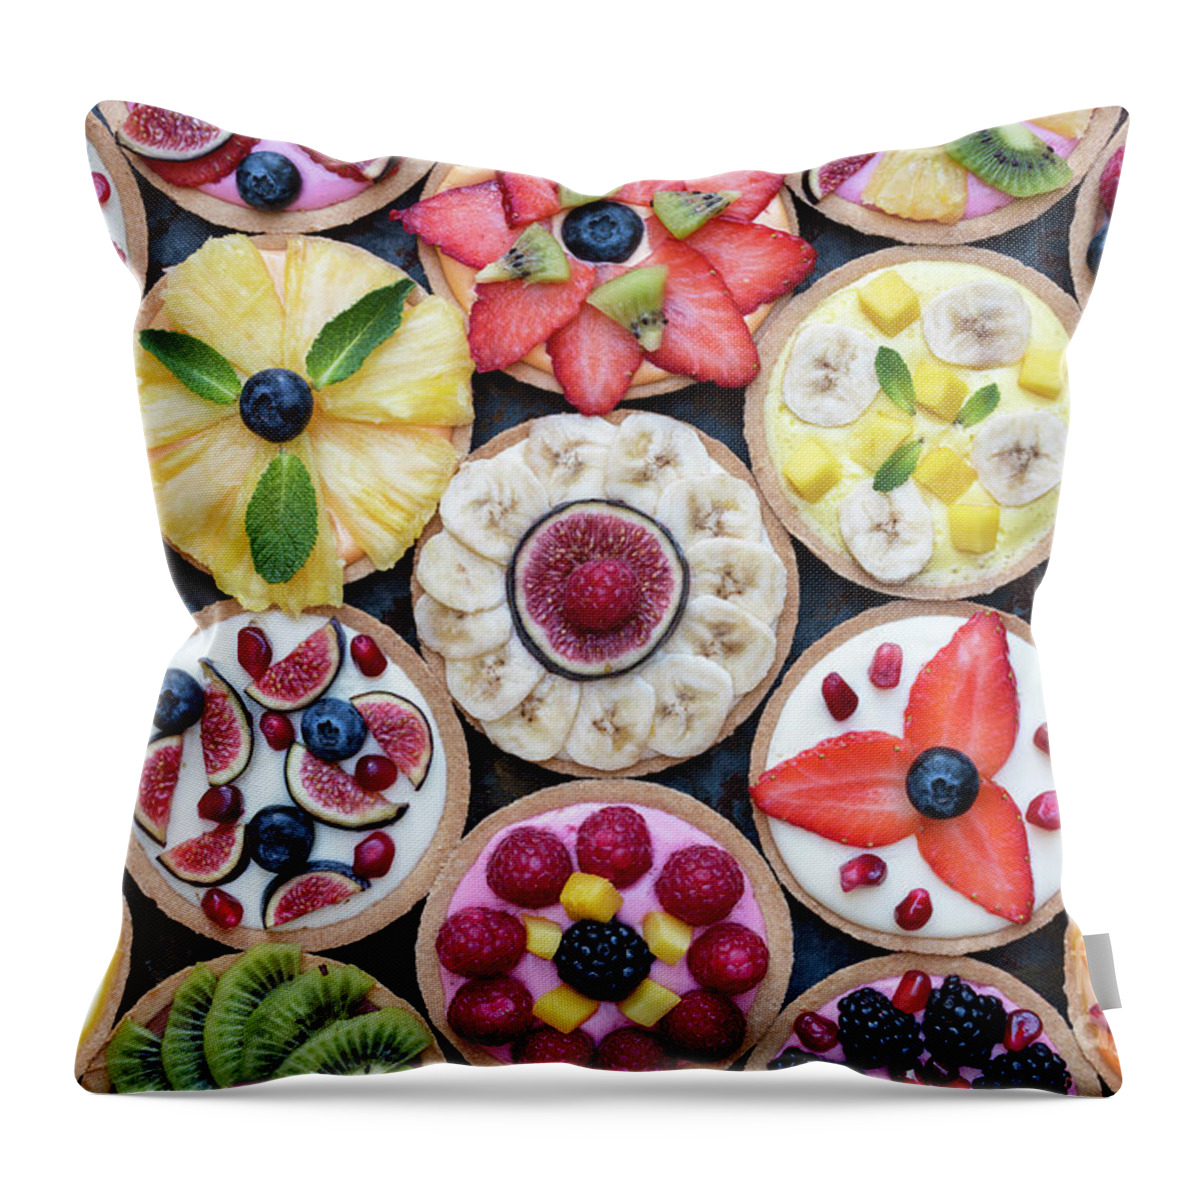 Fruit Tarts Throw Pillow featuring the photograph Fruit Tarts by Tim Gainey